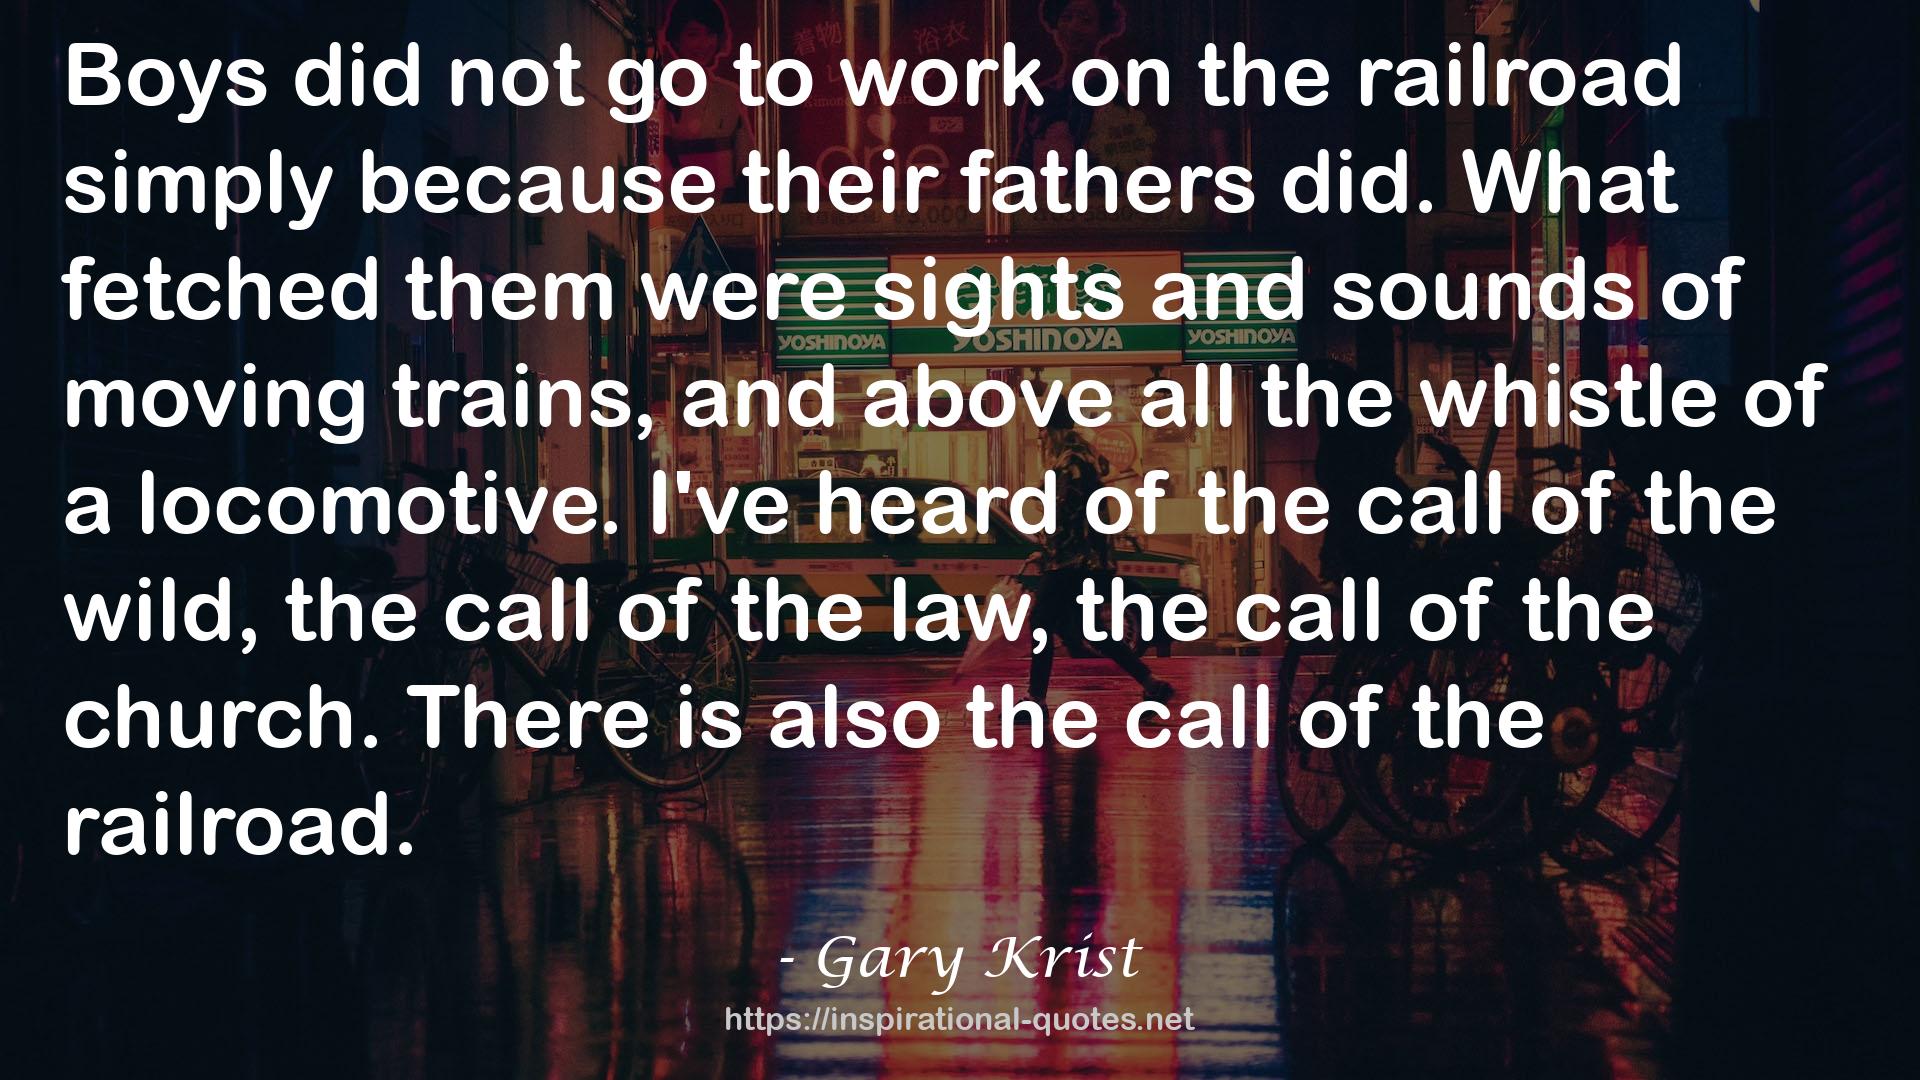 Gary Krist QUOTES